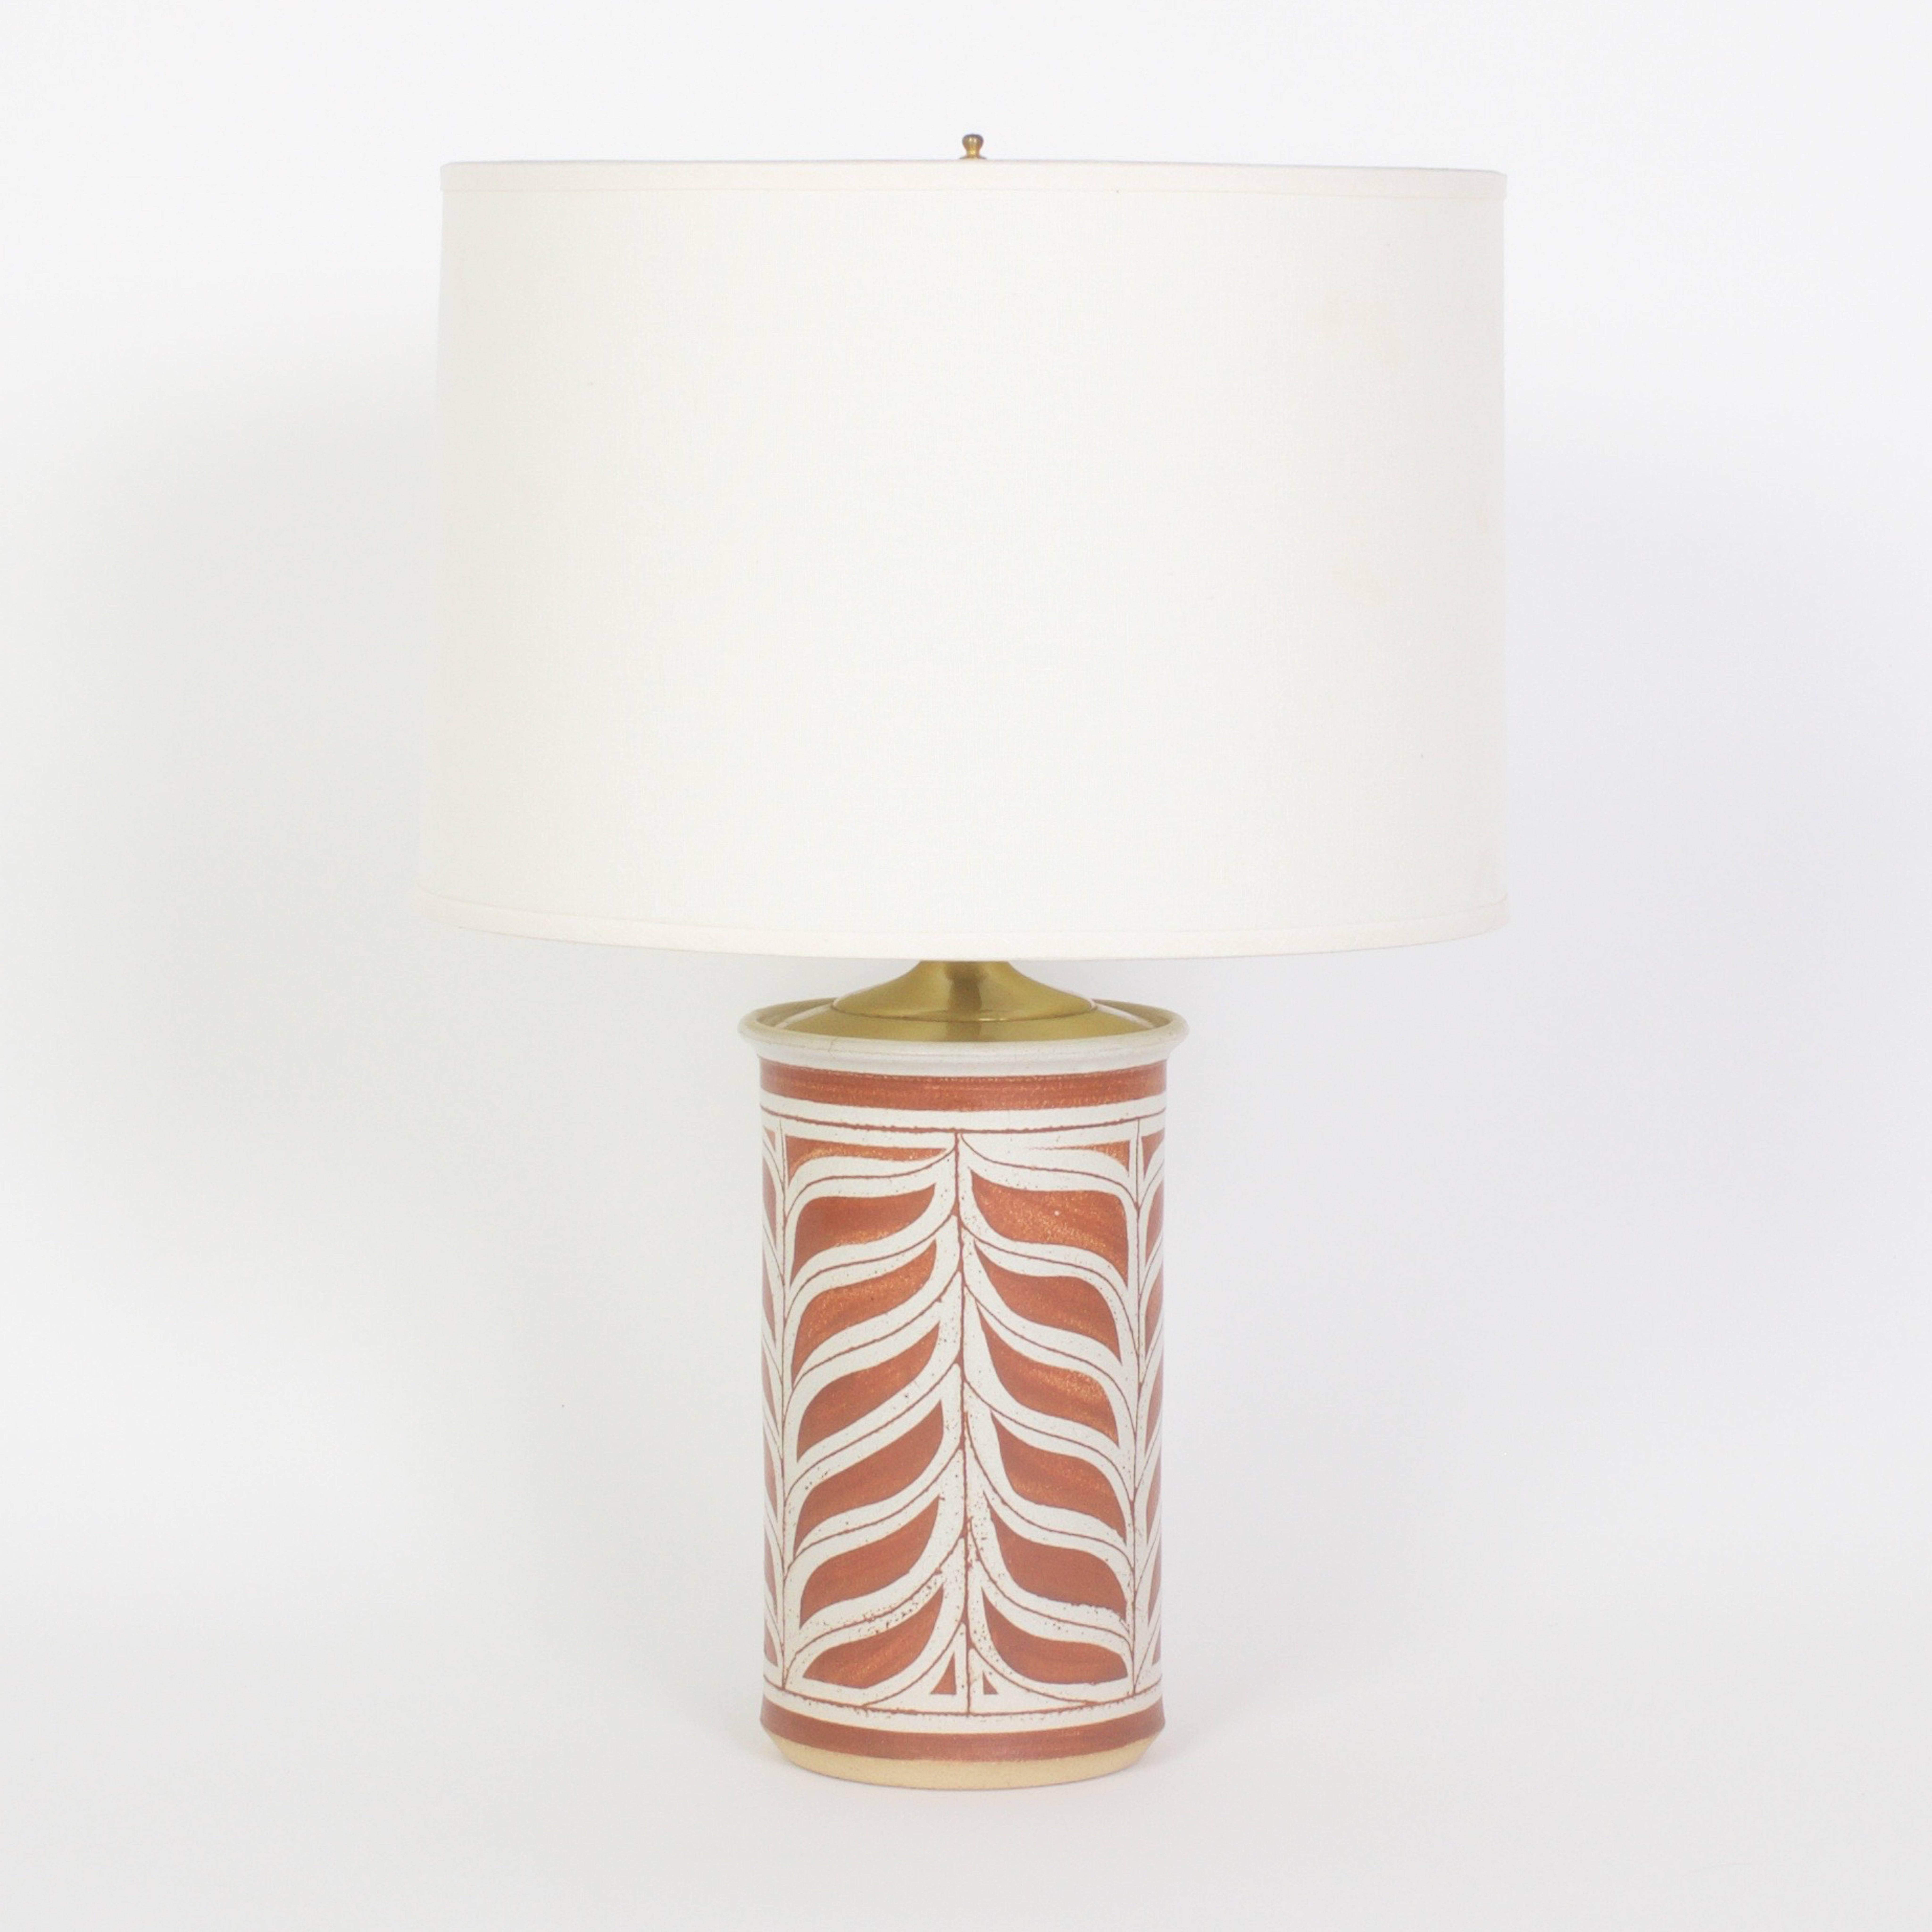 Pair of Mid-Century Modern brown and white glazed terra cotta table lamps decorated in organic patterns derived from nature, where leaves and zebra stripes become one. Newly wired. 